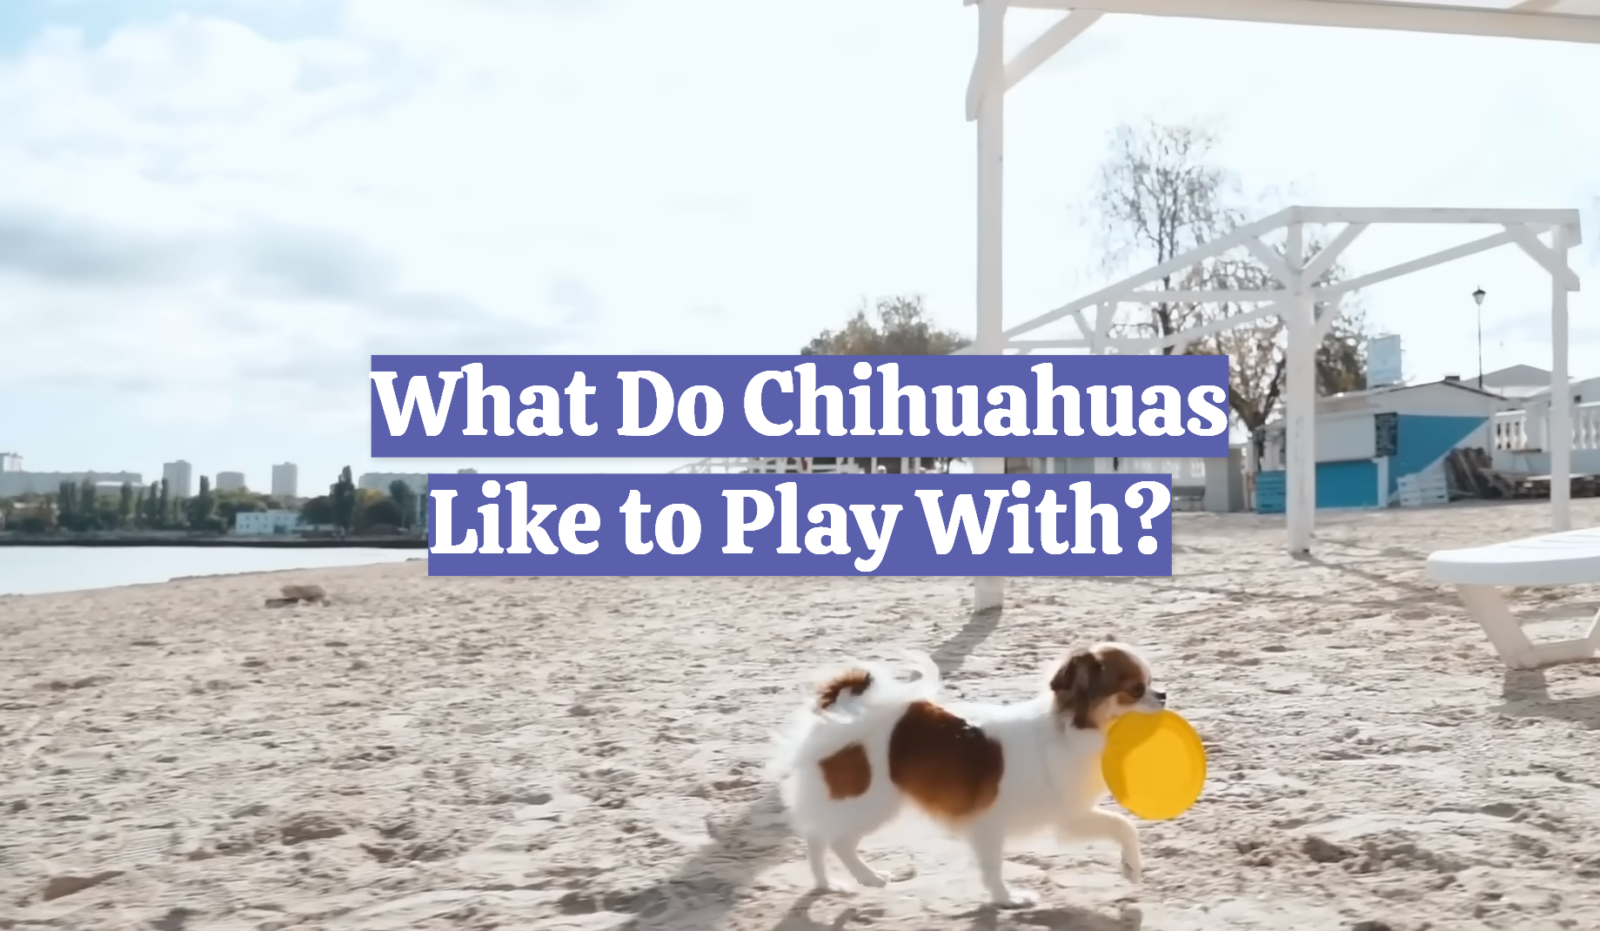 What Do Chihuahuas Like to Play With?